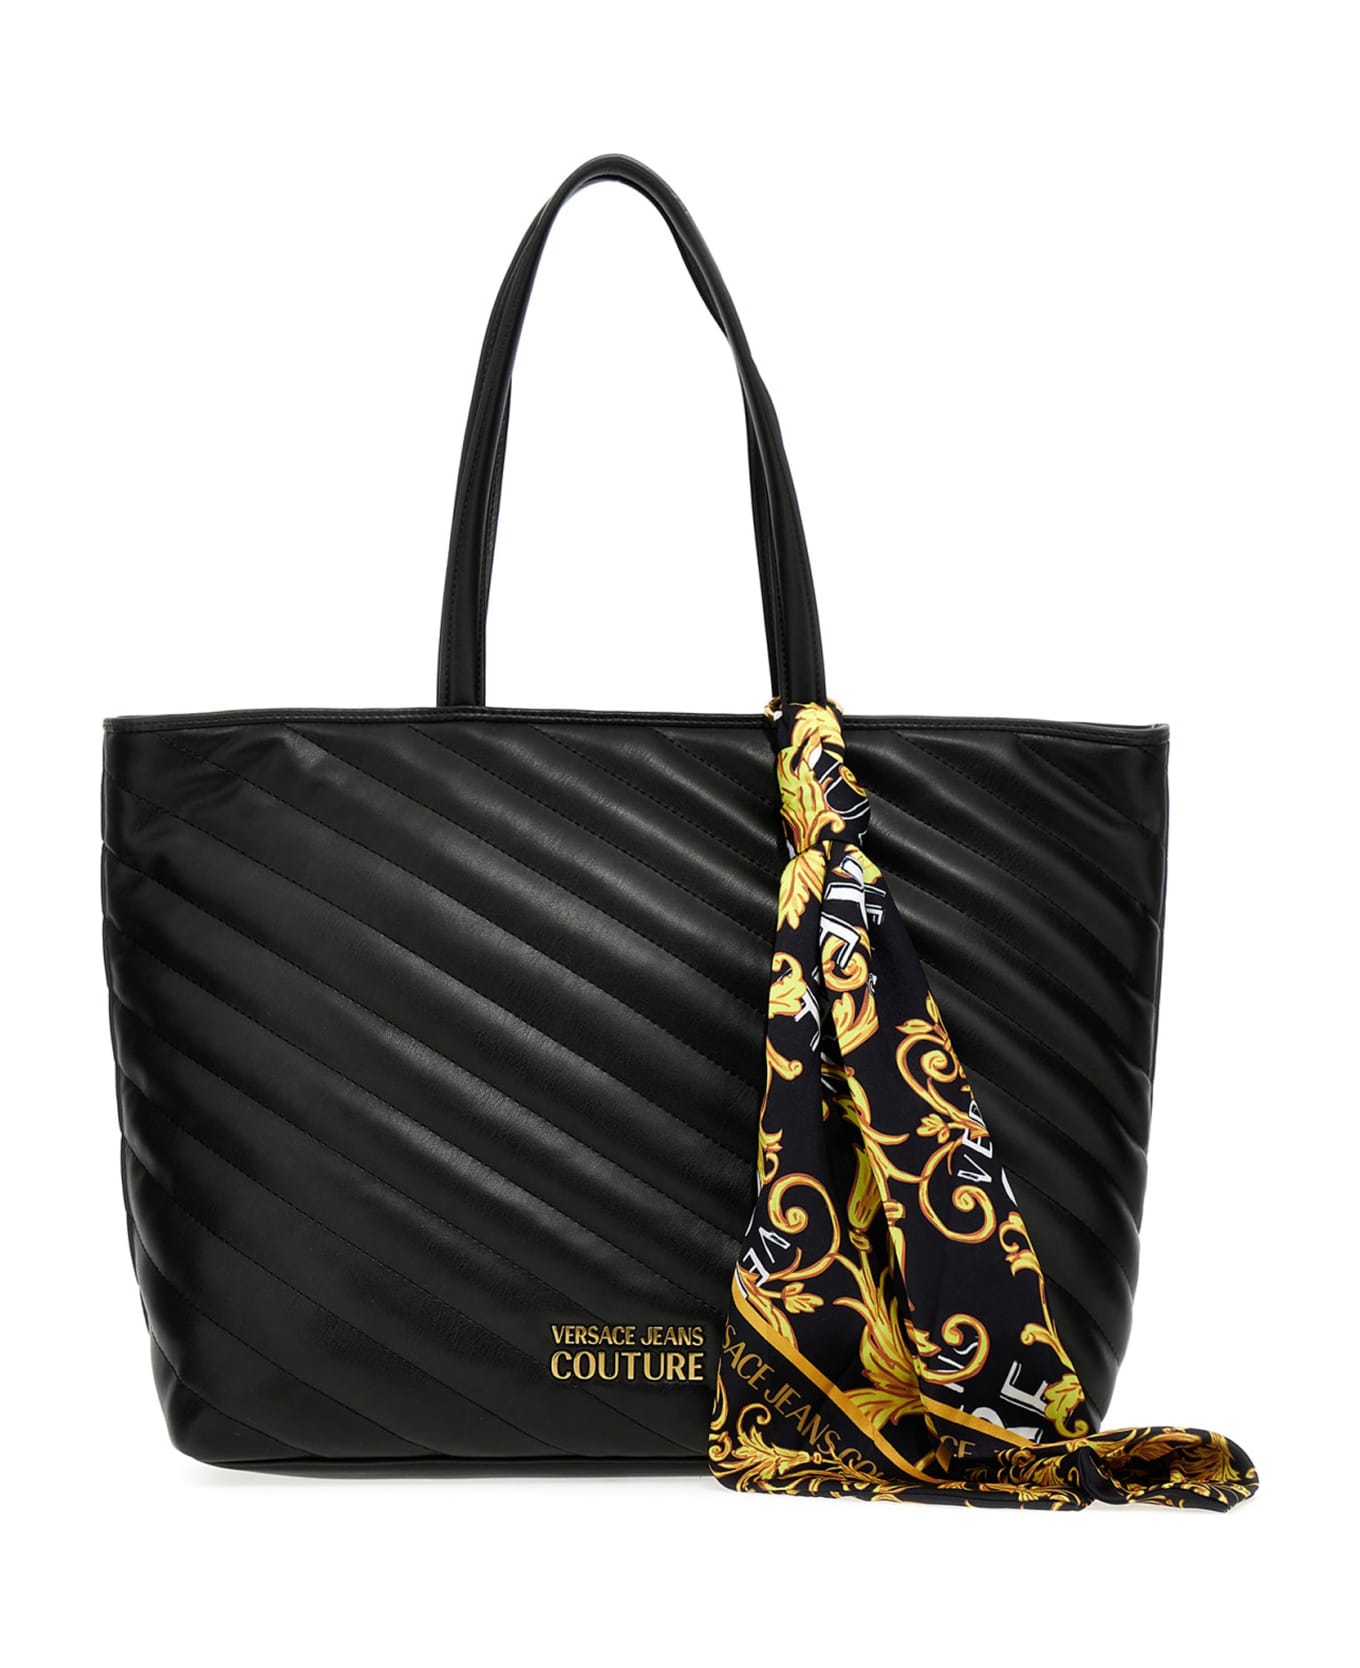 Versace Jeans Couture 'thelma' Shopping Bag - Black  